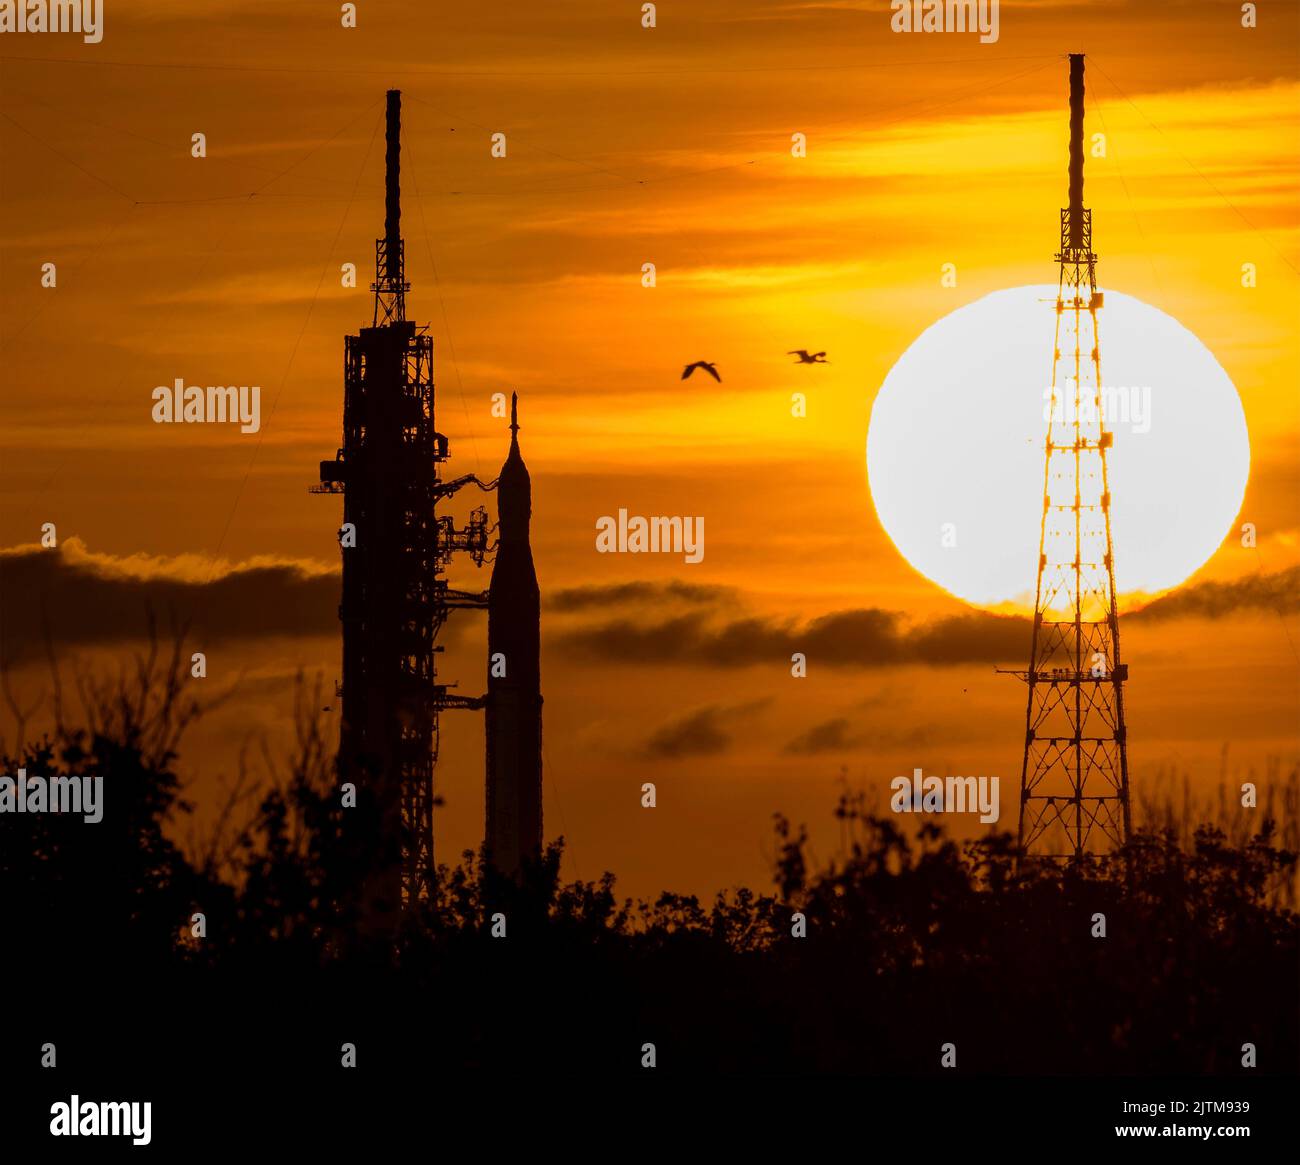 Kennedy Space Center, United States of America. 31 August, 2022. The NASA Space Launch System rocket with the Orion spacecraft is silhouetted by the rising sun on Launch Complex 39B at the Kennedy Space Center, August 31, 2022, in Cape Canaveral, Florida. The countdown for the un-crewed flight test has been rescheduled for September 3rd following a problem with the fuel system caused an extended delay. Credit: Bill Ingalls/NASA/Alamy Live News Stock Photo